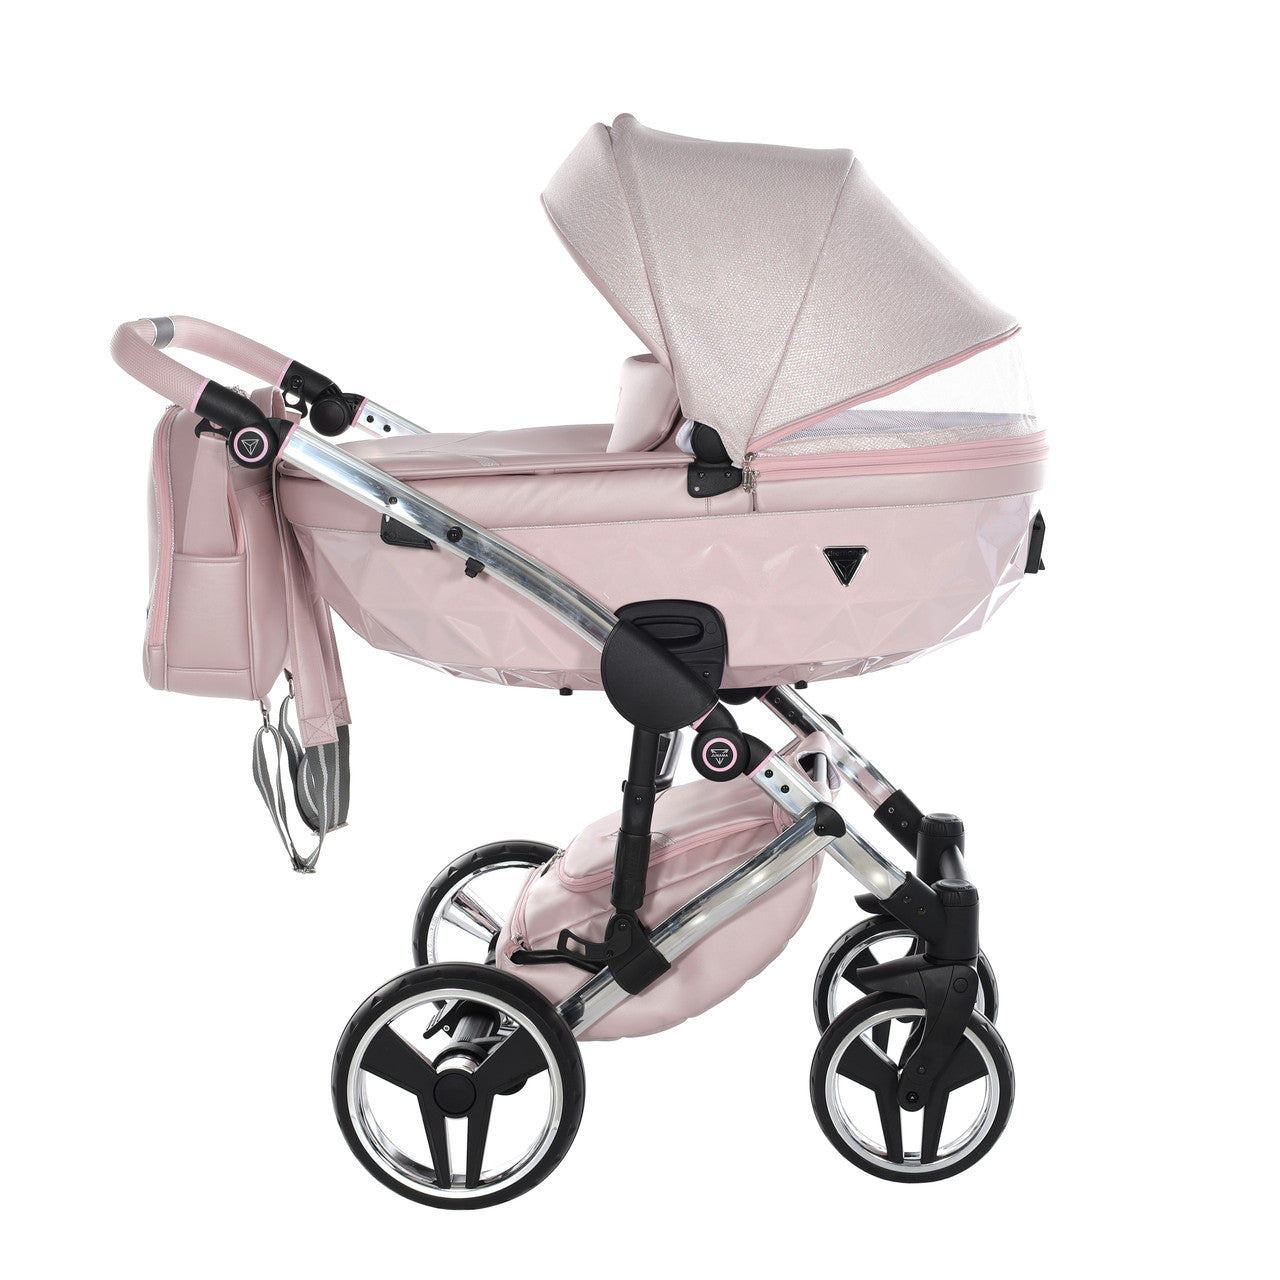 Image of Junama S-class Dolce 3 in 1 Travel System - Pink